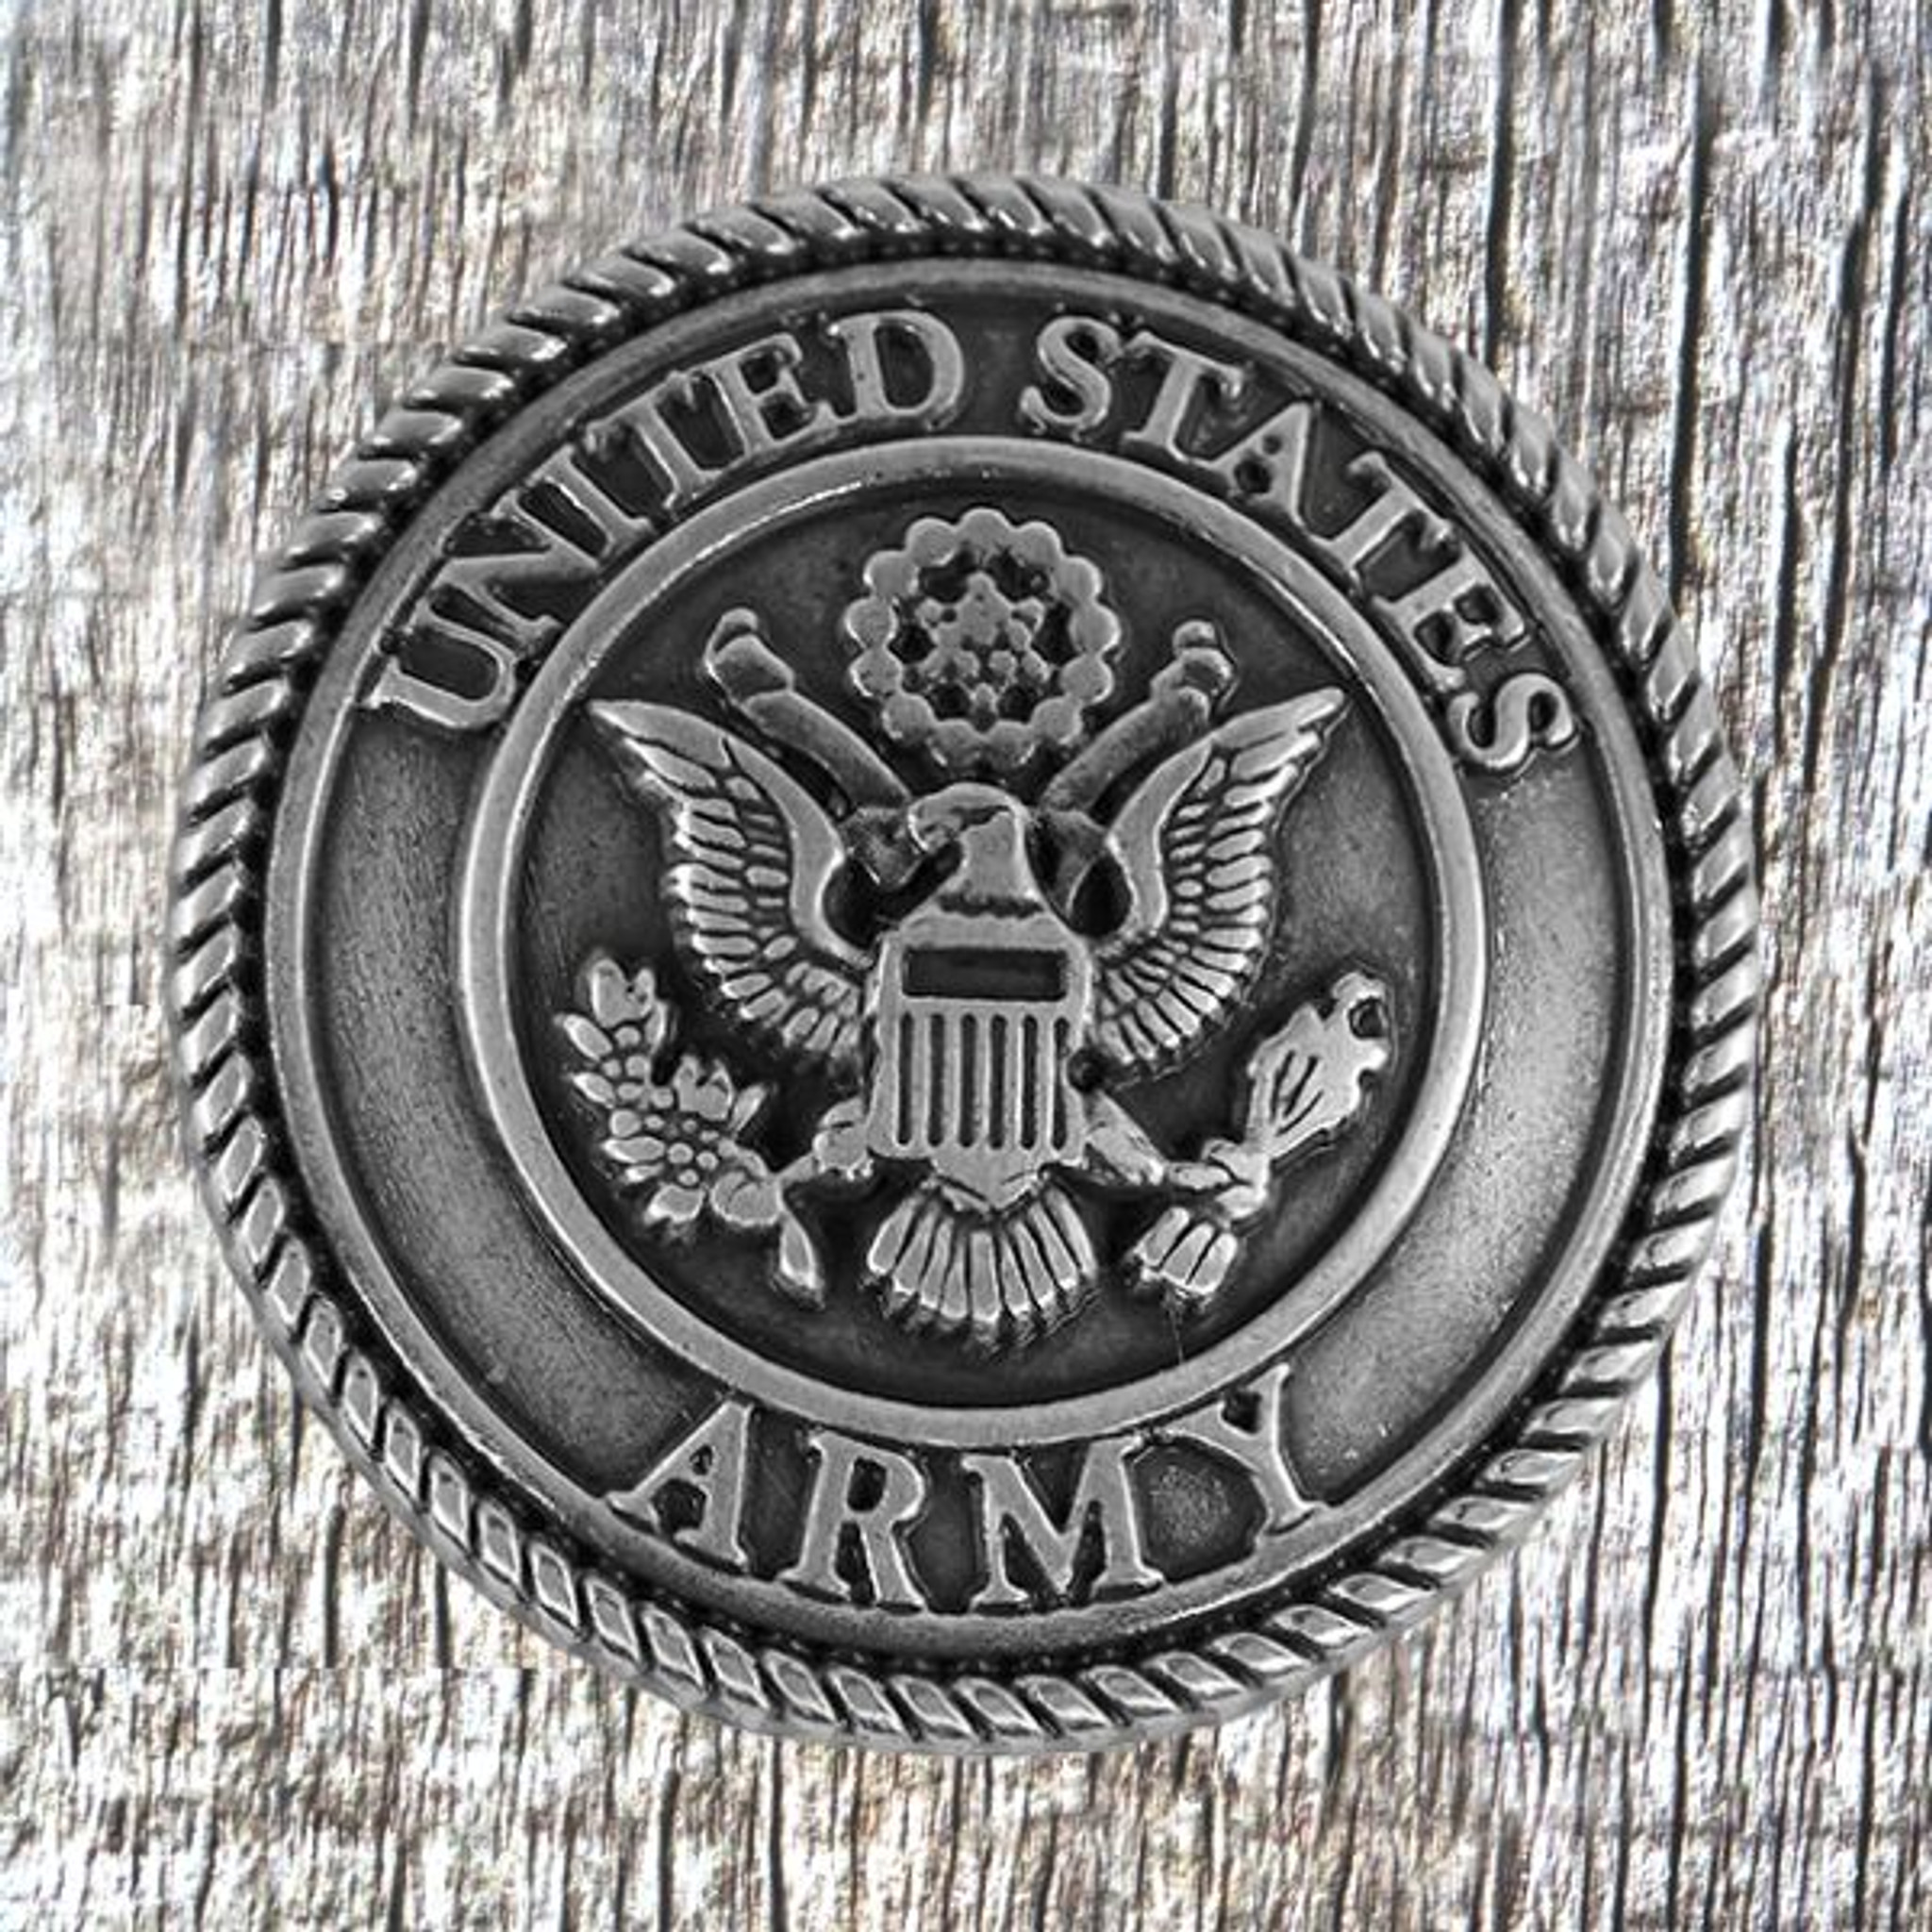 MILITARY 1-1/4 INCH CONCHOS UNITED STATES MARINE CORPS